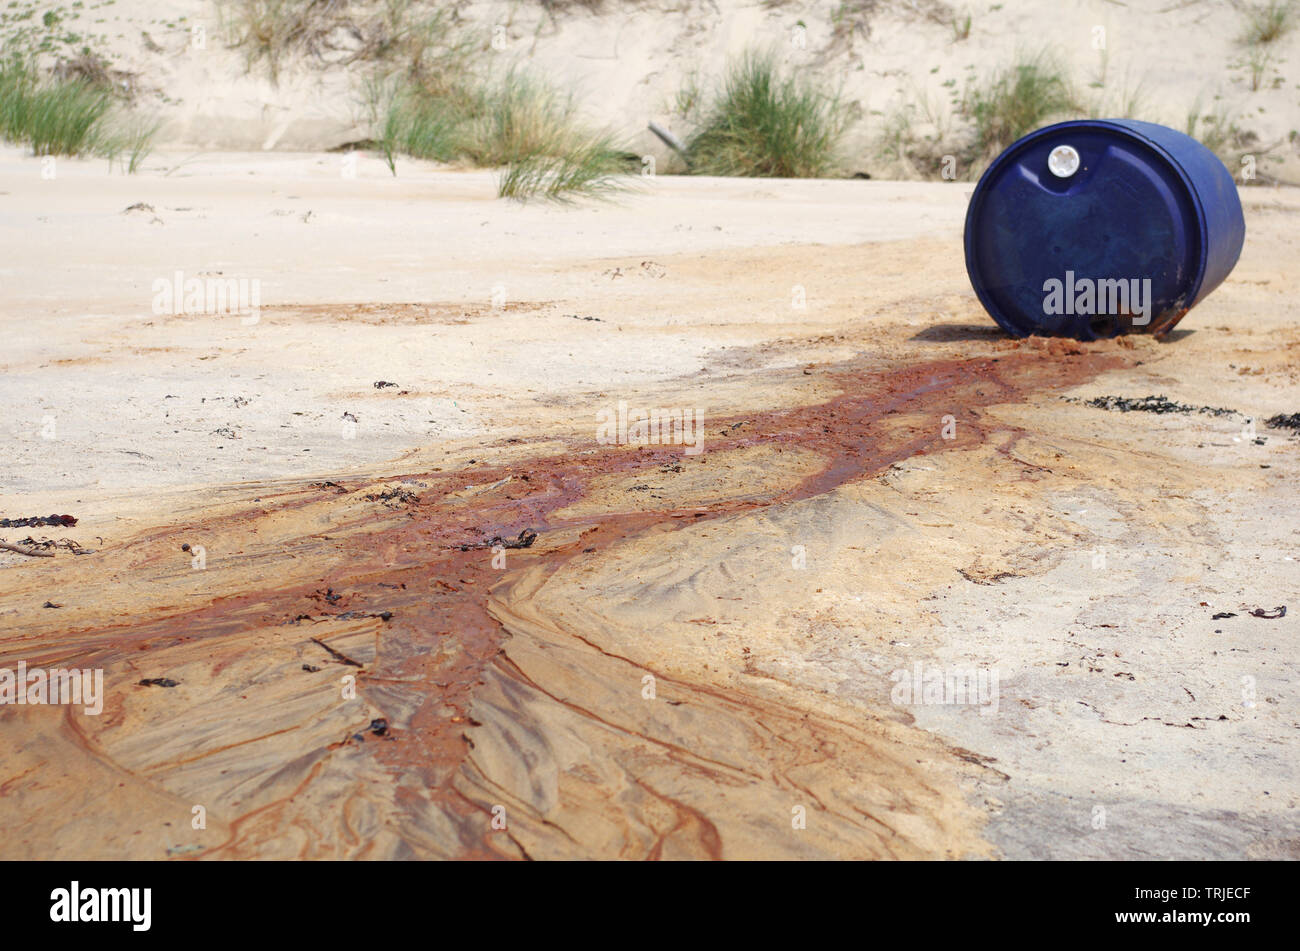 Toxic waste spilled on a beach Stock Photo